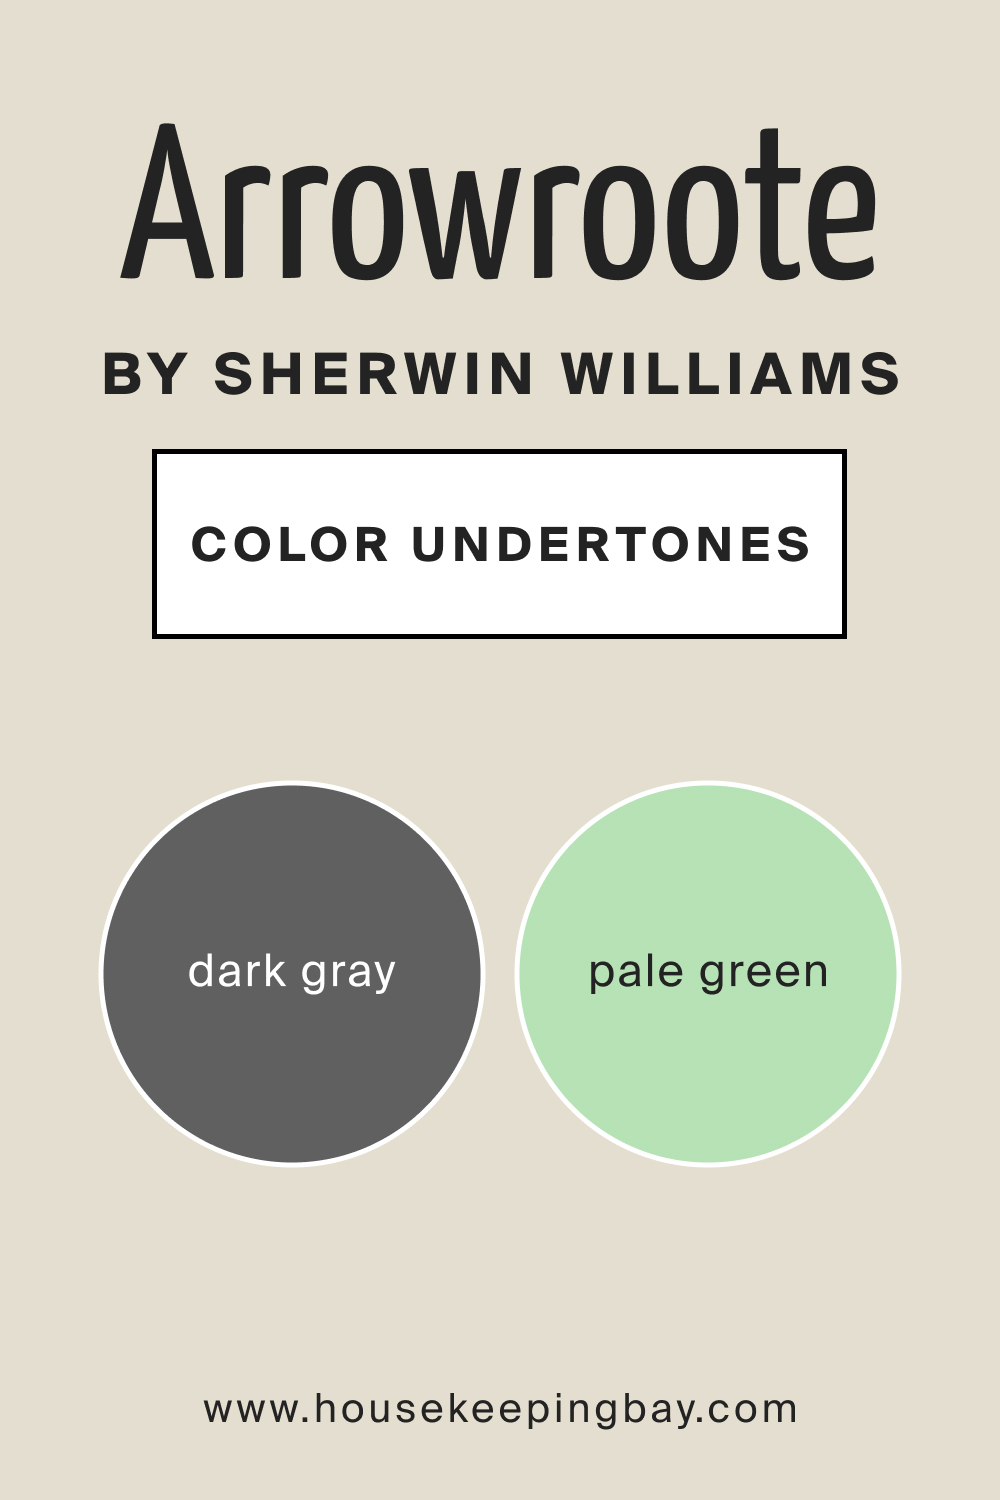 SW 9502 Arrowroote by Sherwin Williams Color Undertone